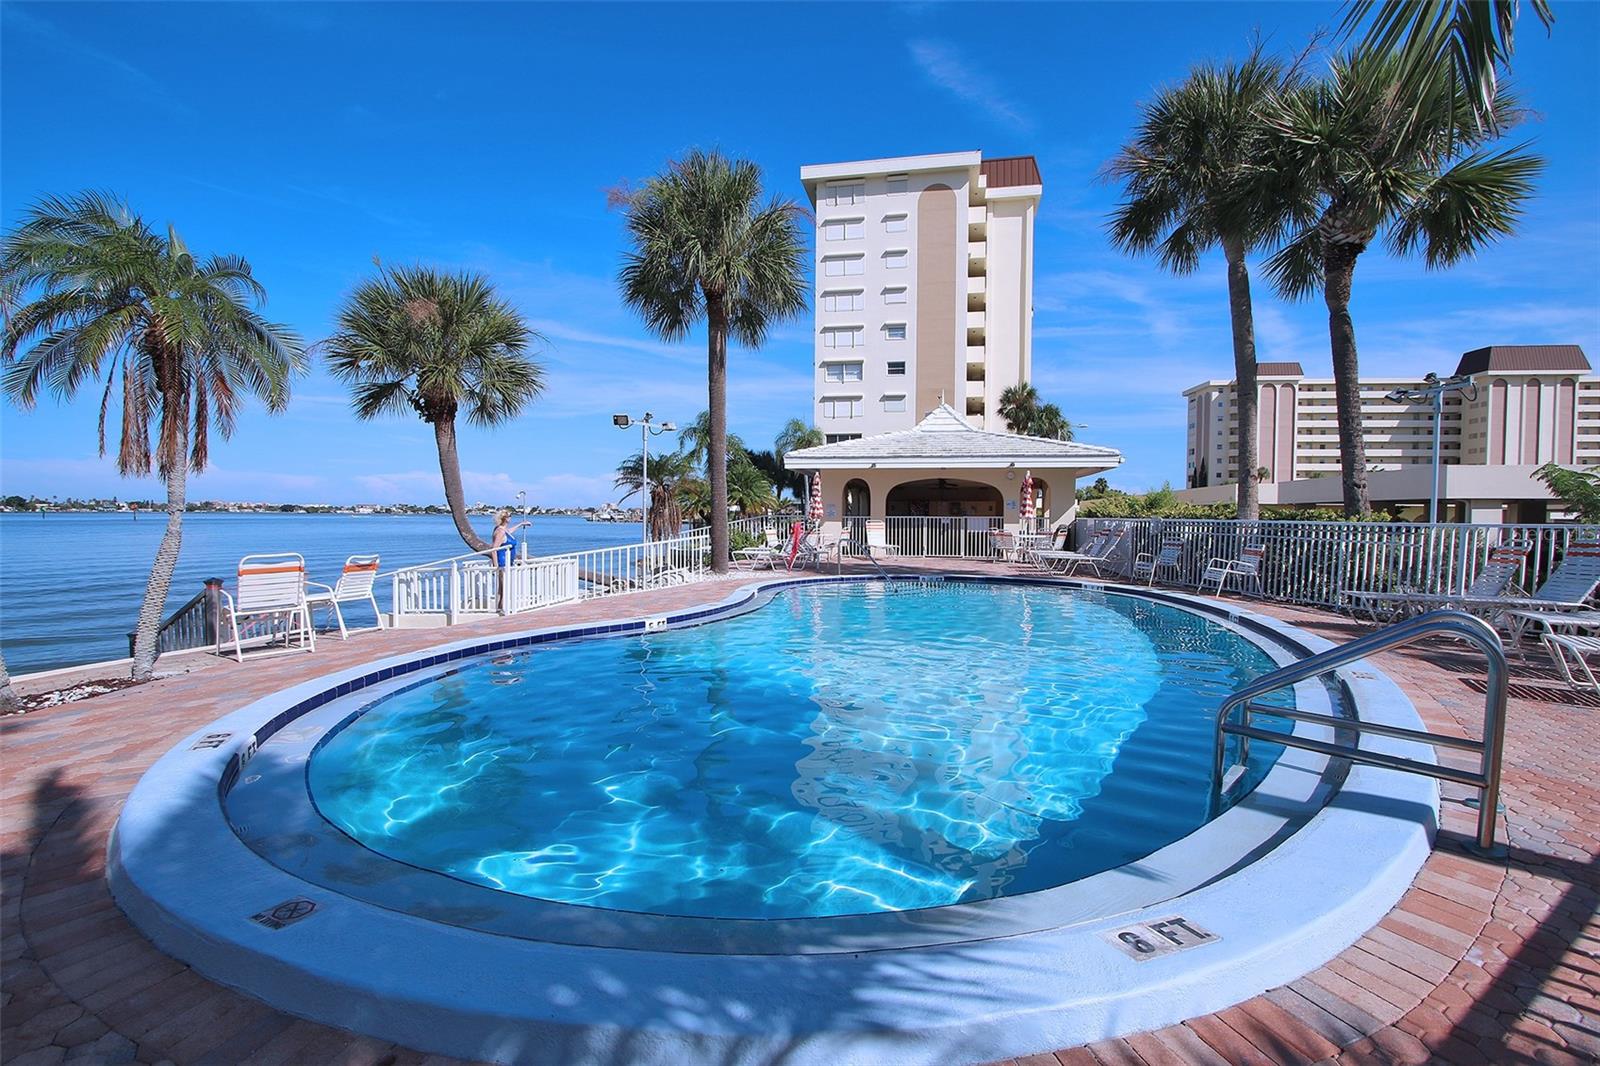 2 pools! This one is next to the Intracoastal.